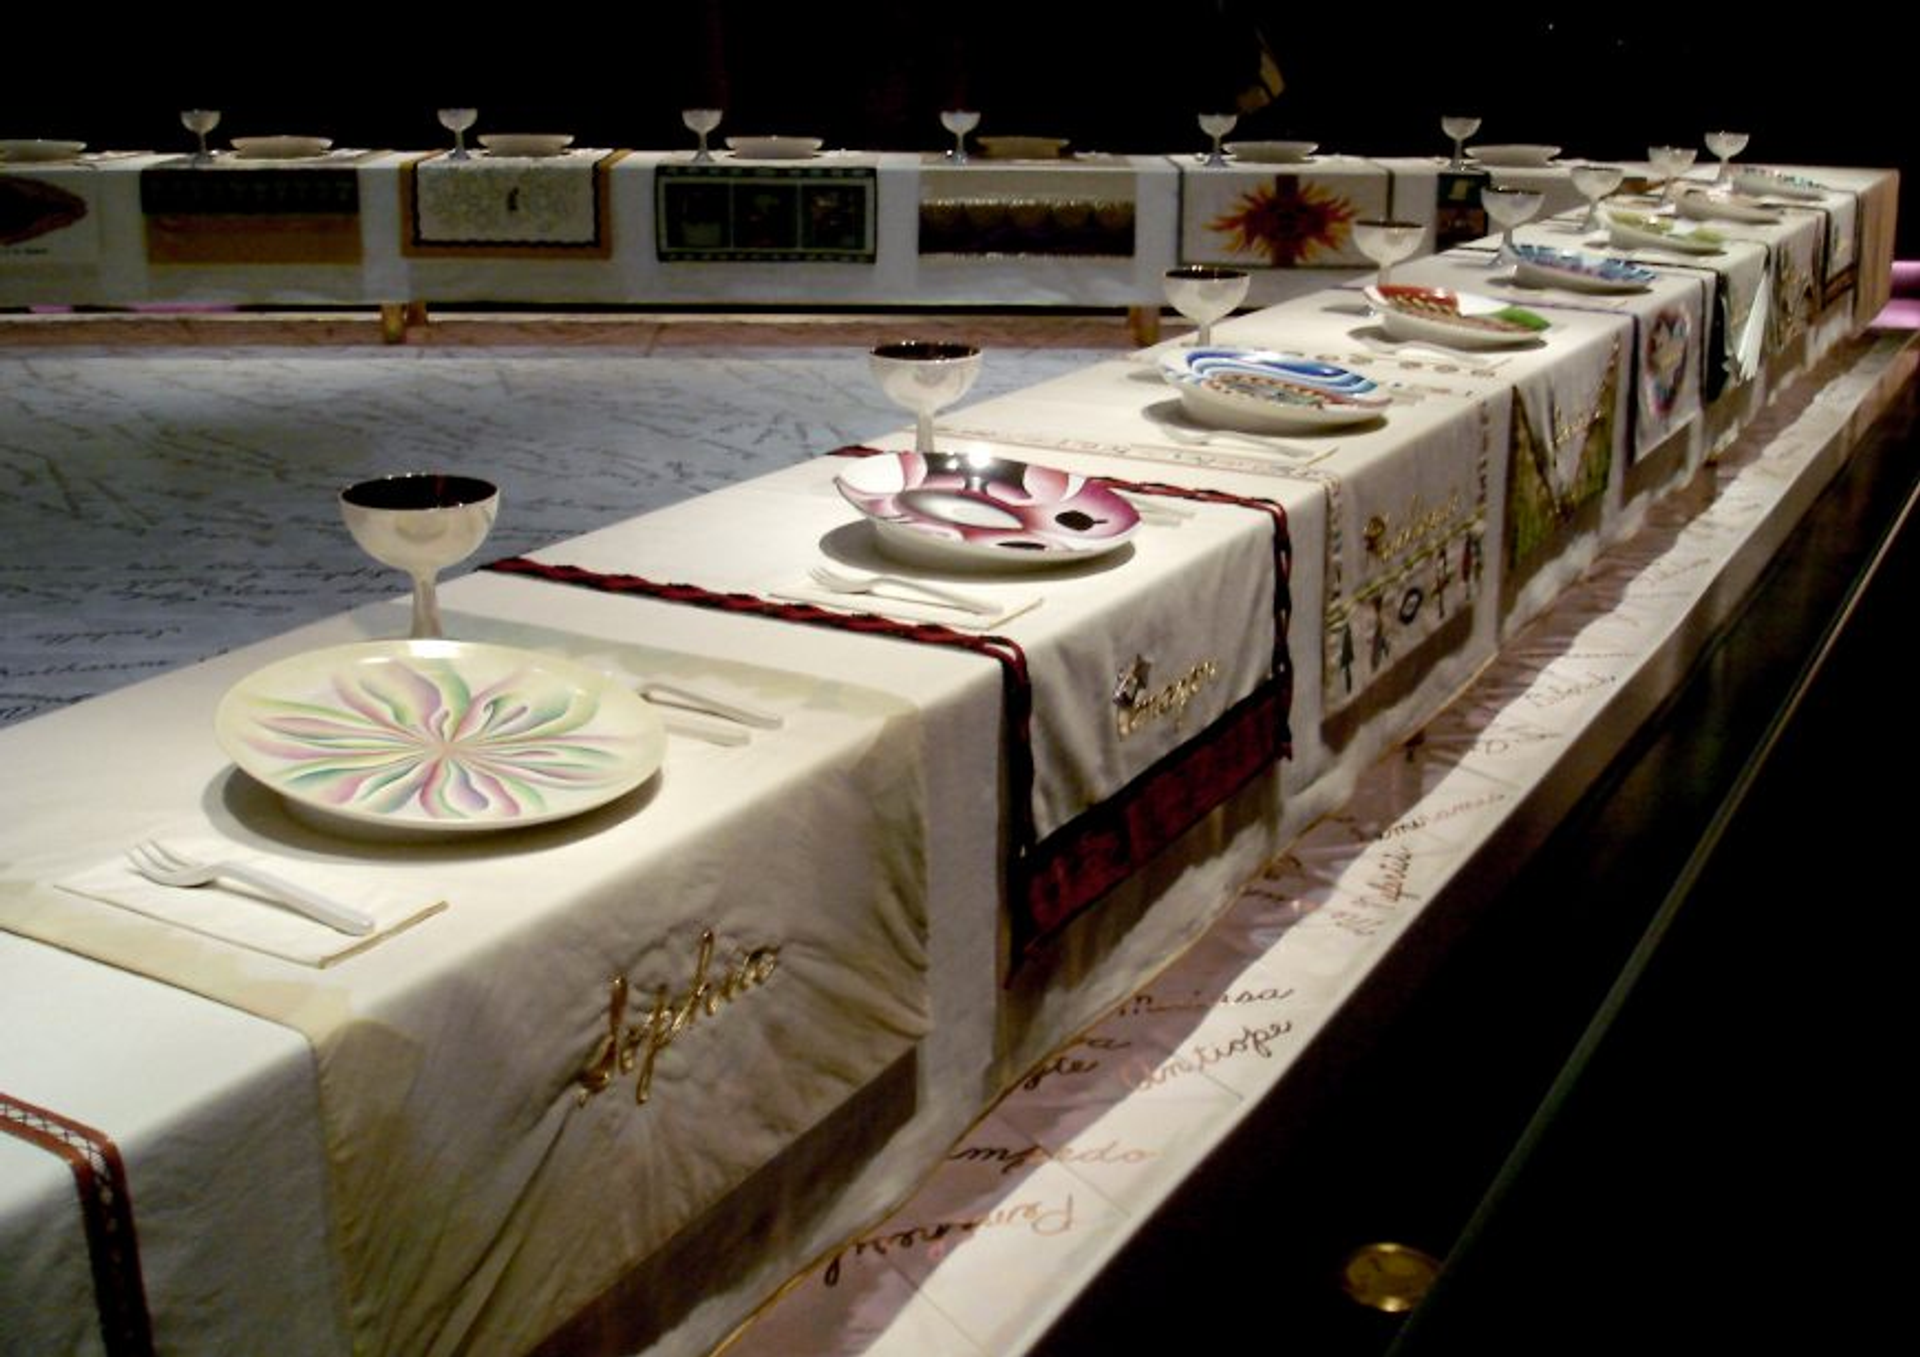 A photograph of Louise Bourgeois’ The Dinner Party installation. A view of a triangular-shaped dining table with ornate and decorative place settings.